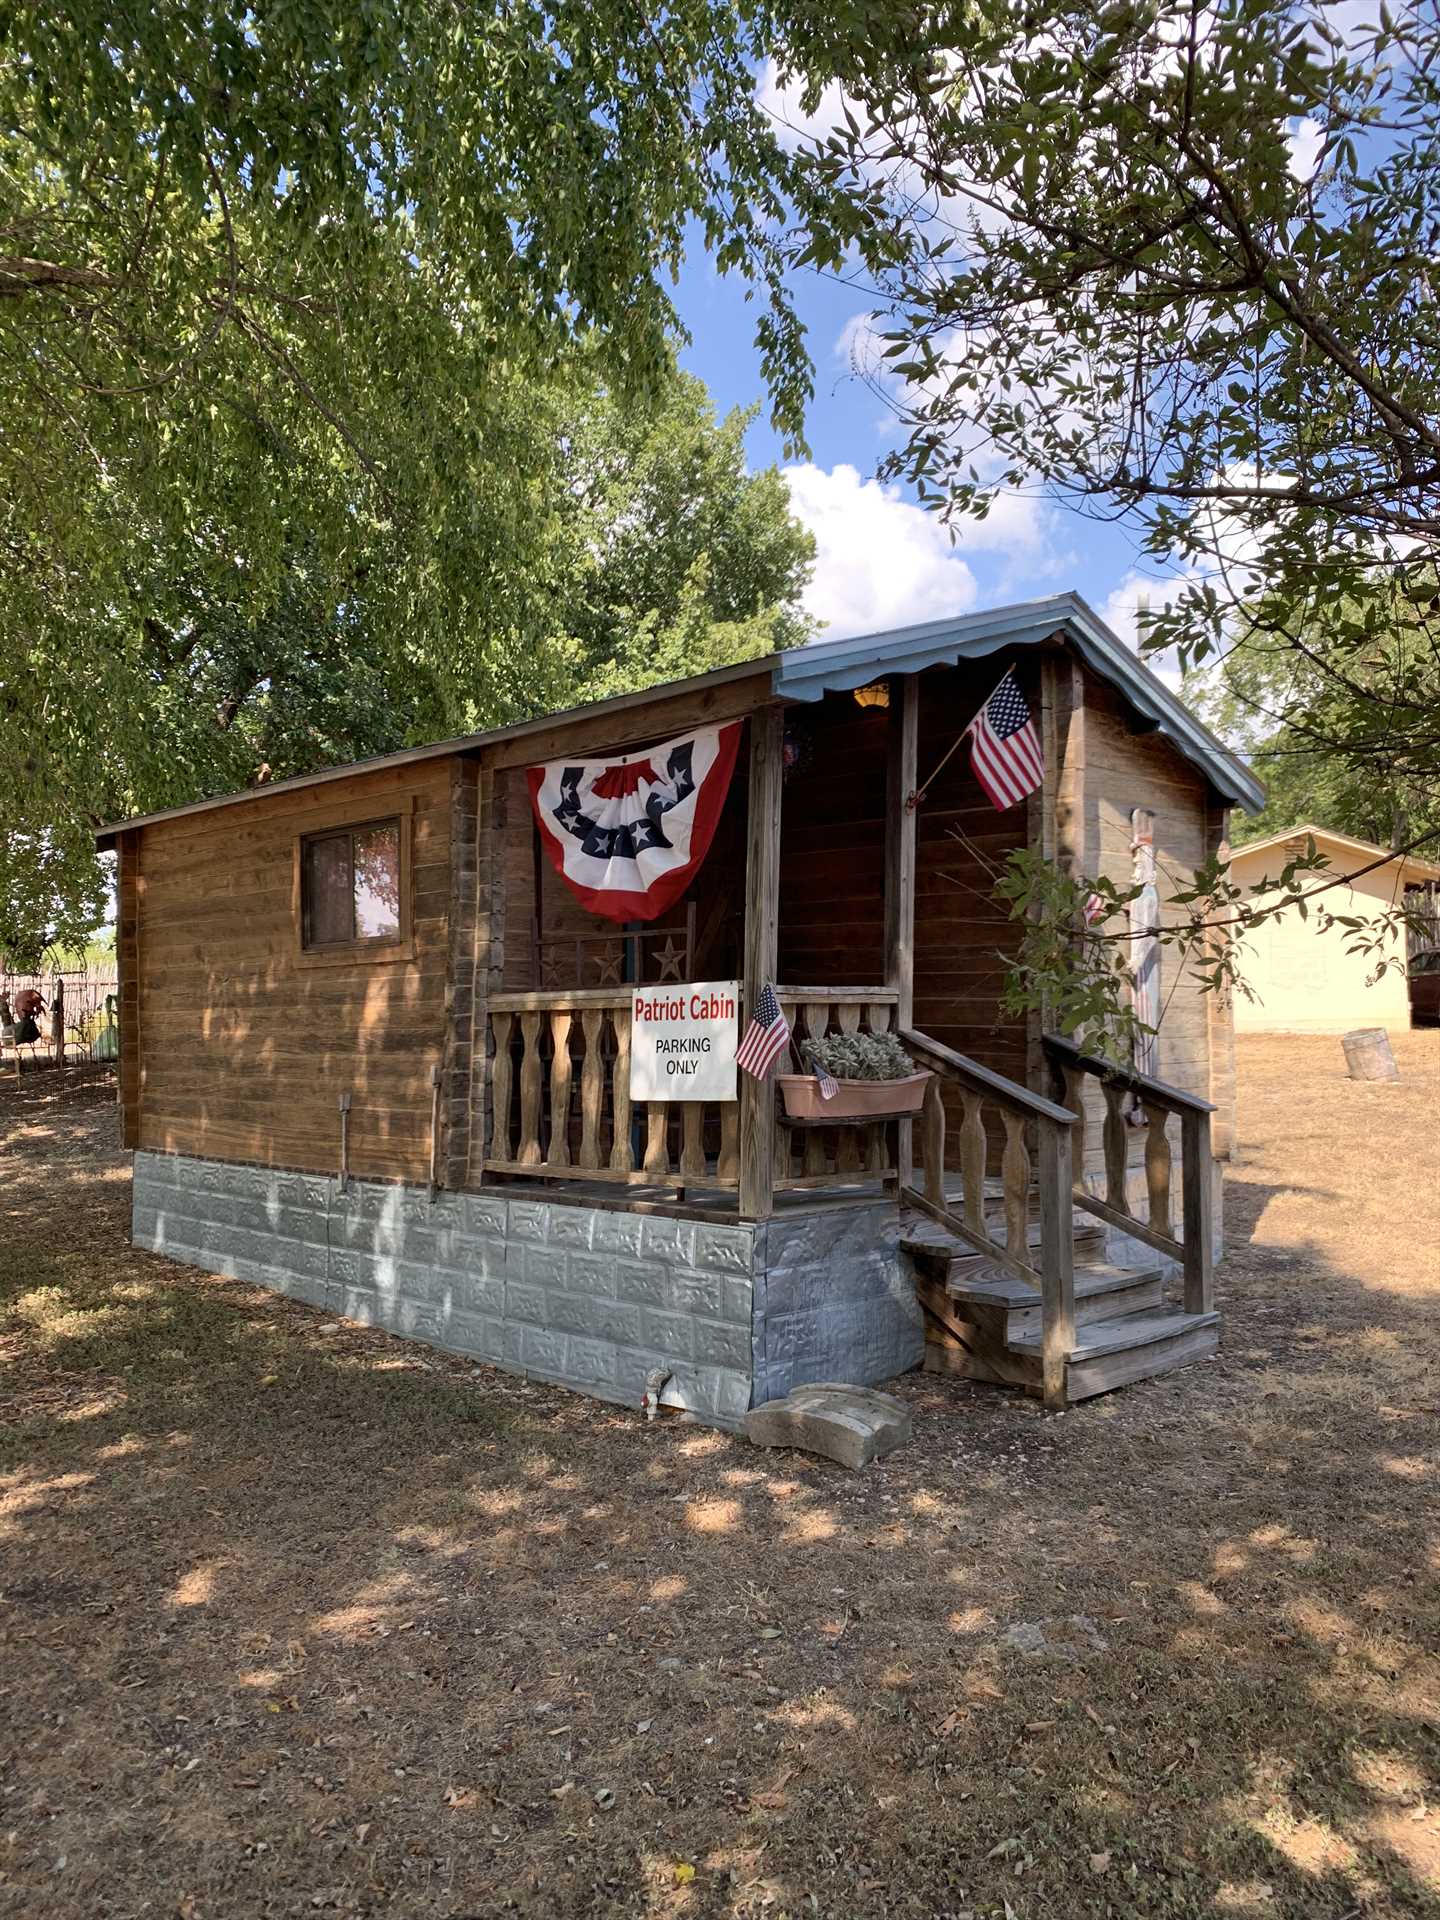                                                 Outside the Patriot Cabin, you'll find a cozy shaded porch, enclosed play area for kids and pets, and a charcoal grill and fire pit for outdoor meals and snacks!